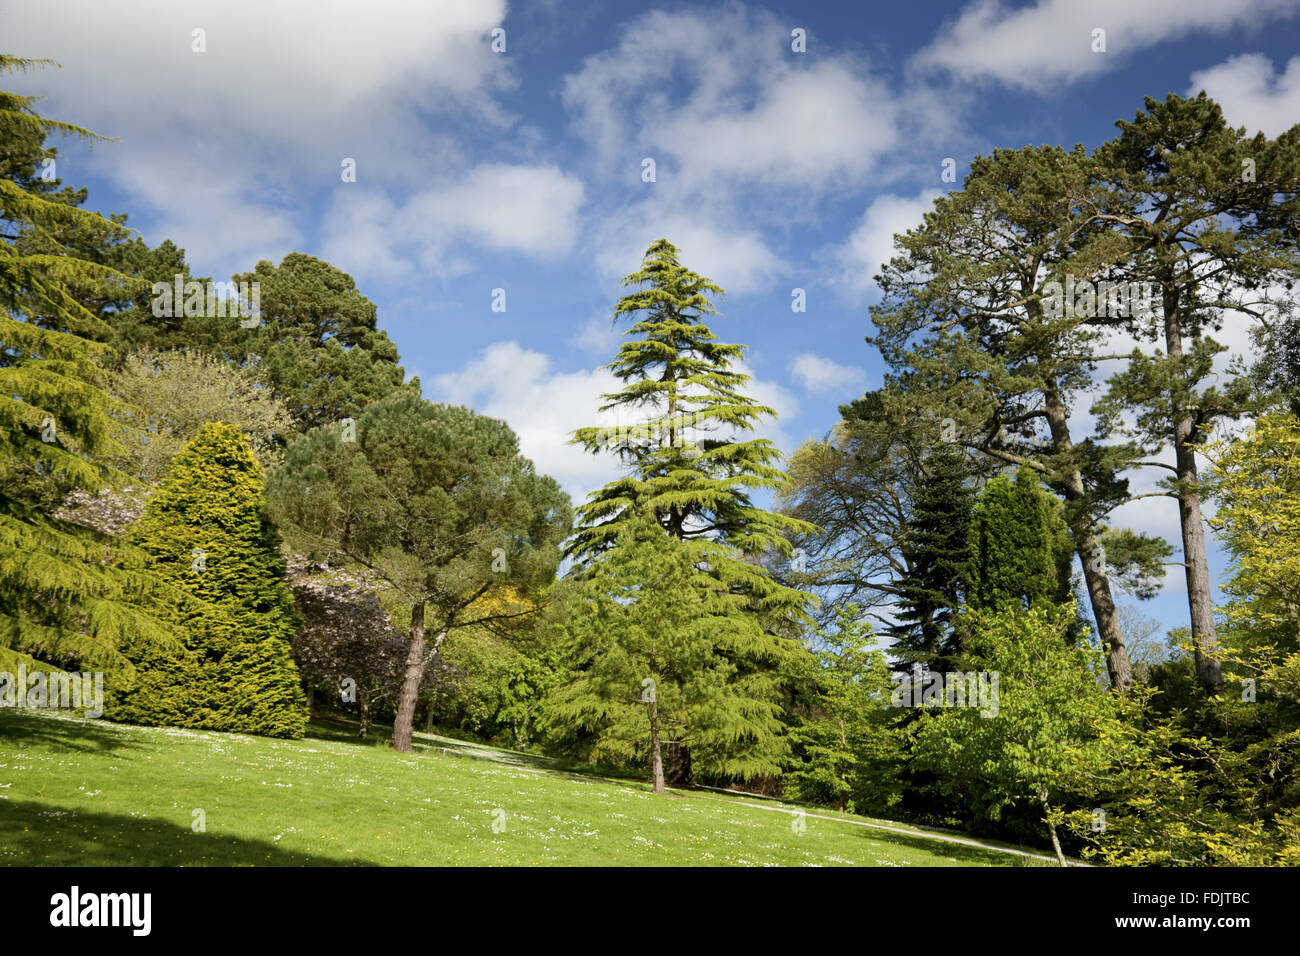 Carcaddon, an area of the garden that was formerly an orchard and and nursery, at Trelissick Garden, Cornwall, in May. Carcaddon is now an area of trees and shrubs. Stock Photo